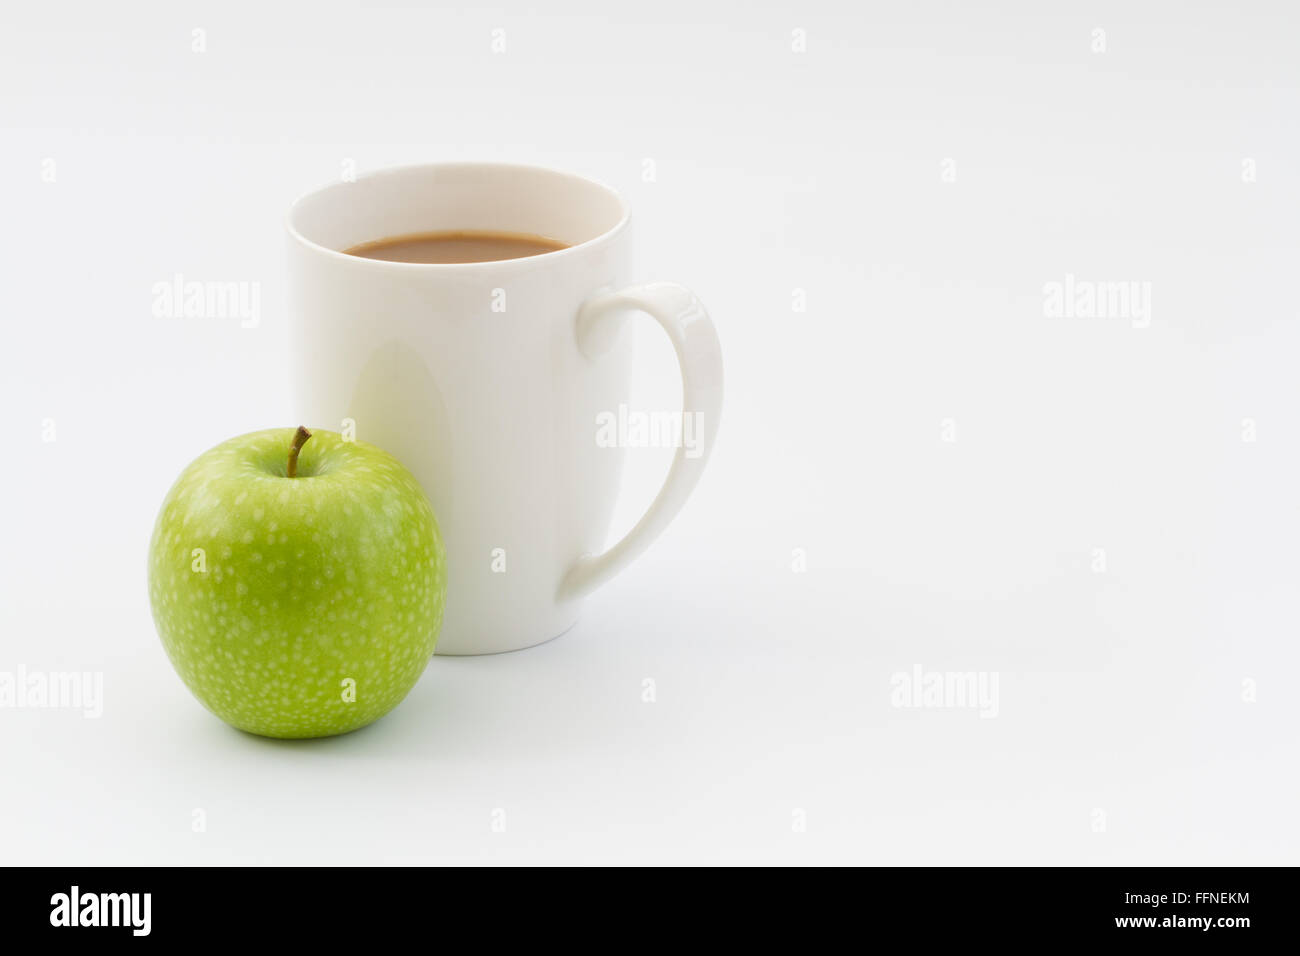 A healthy work break snack of a fresh, green apple and hot cup of coffee or tea on an isolated white background. Stock Photo